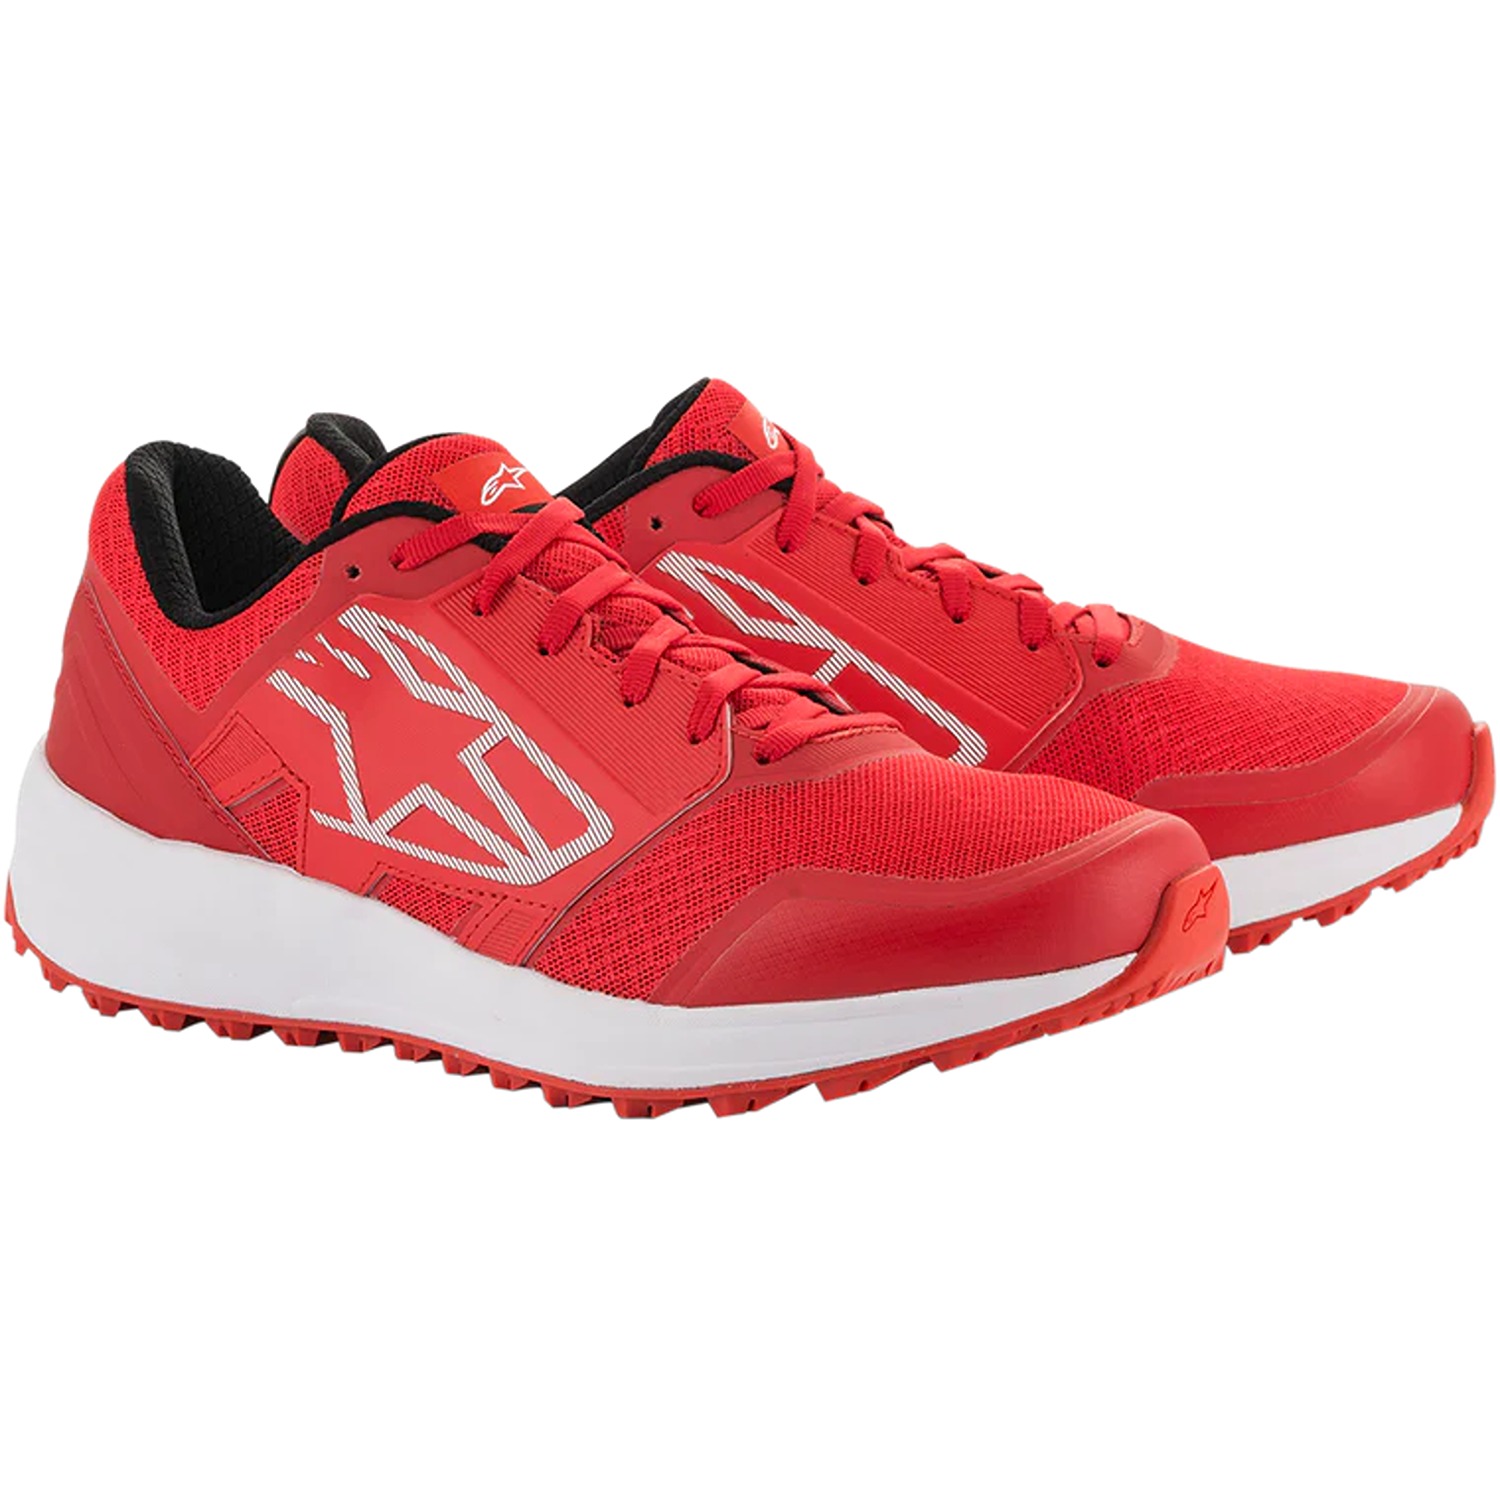 Image of Alpinestars Meta Trail Shoes Red White Taille US 7